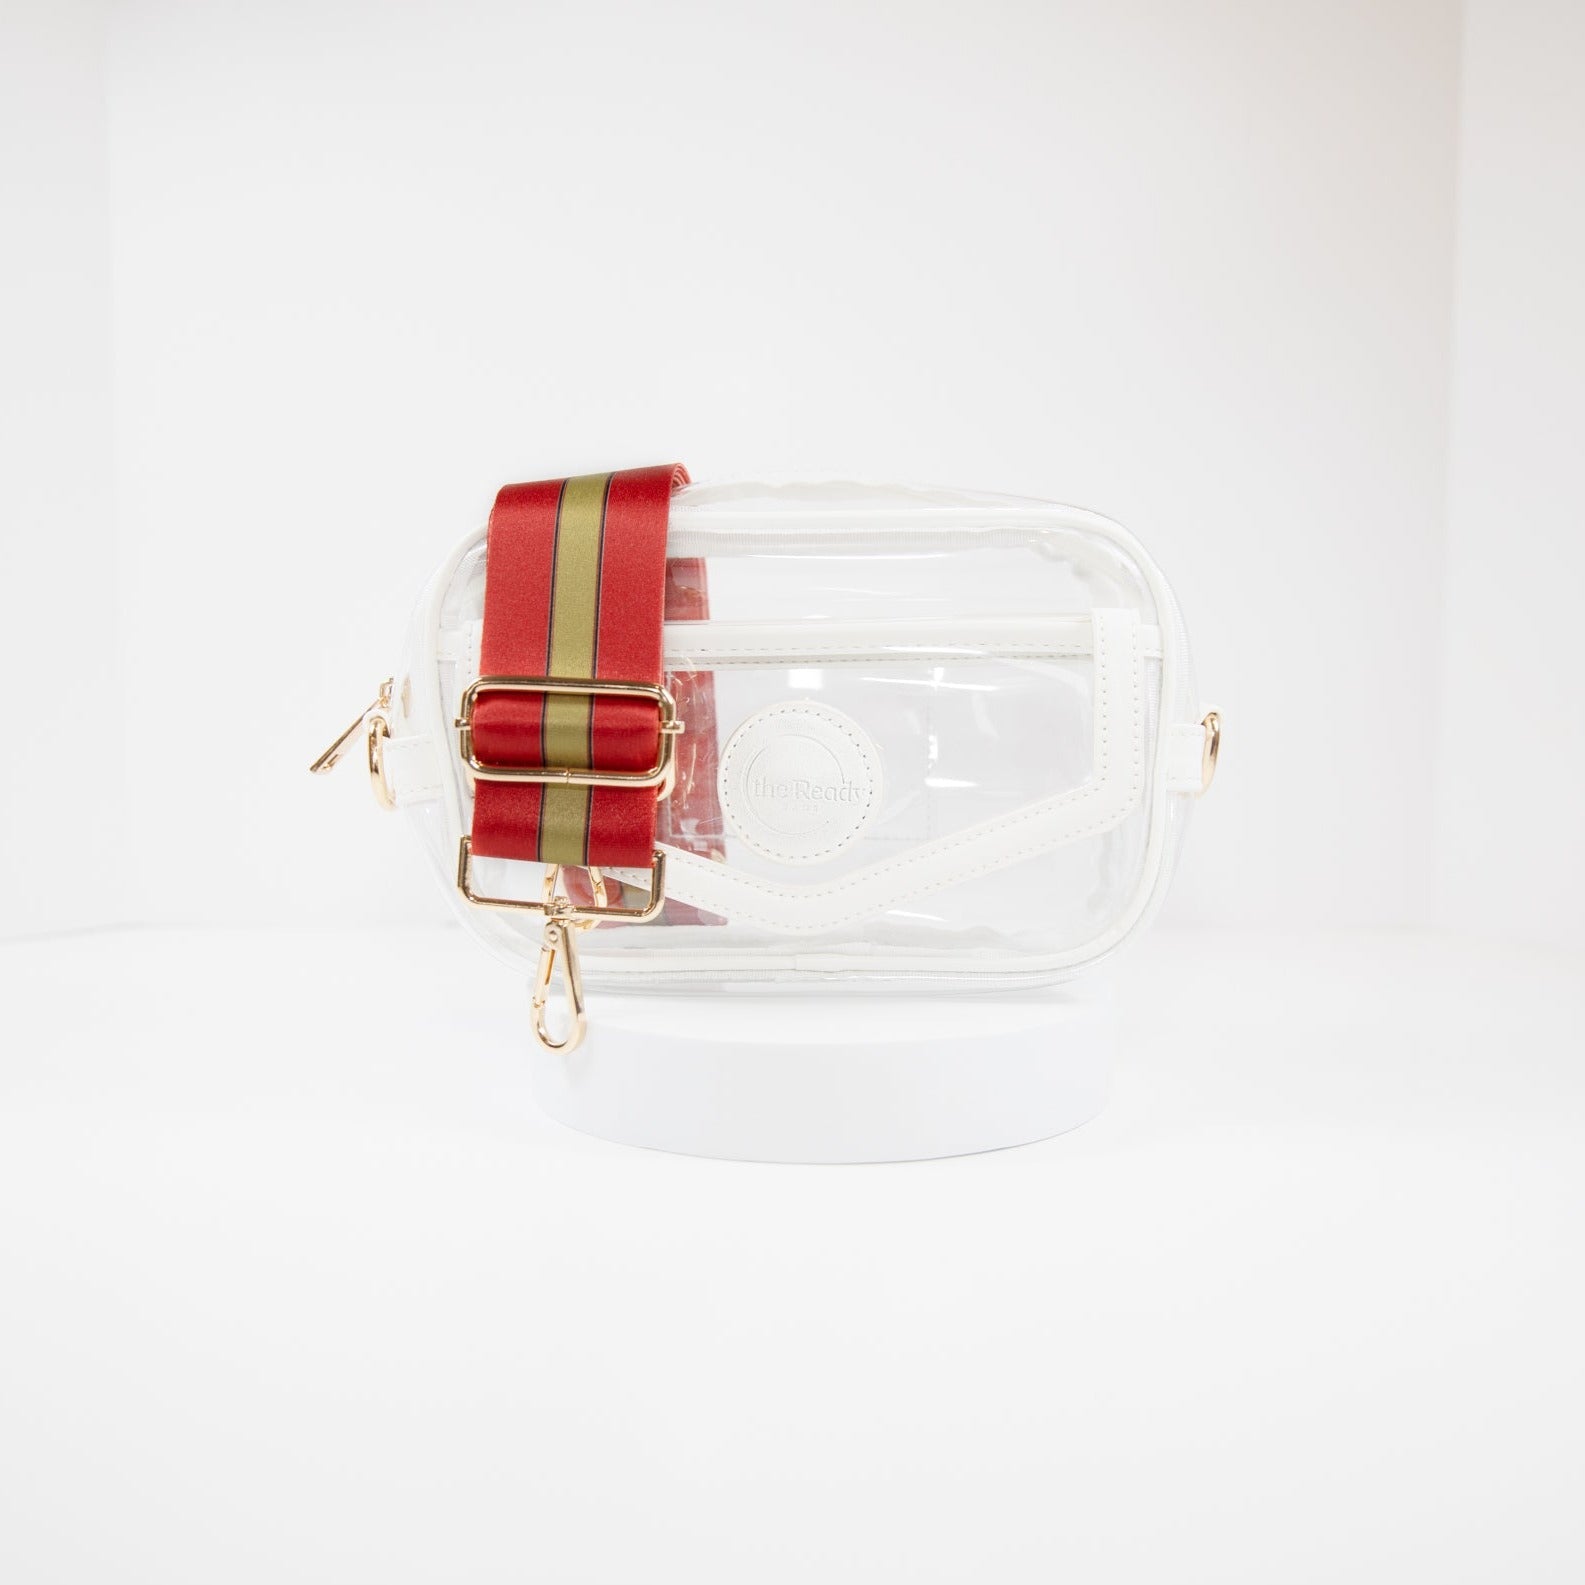 Clear Stadium Bag in white leather trim, front facing, with a crossbody strap in San Francisco 49er team colors.